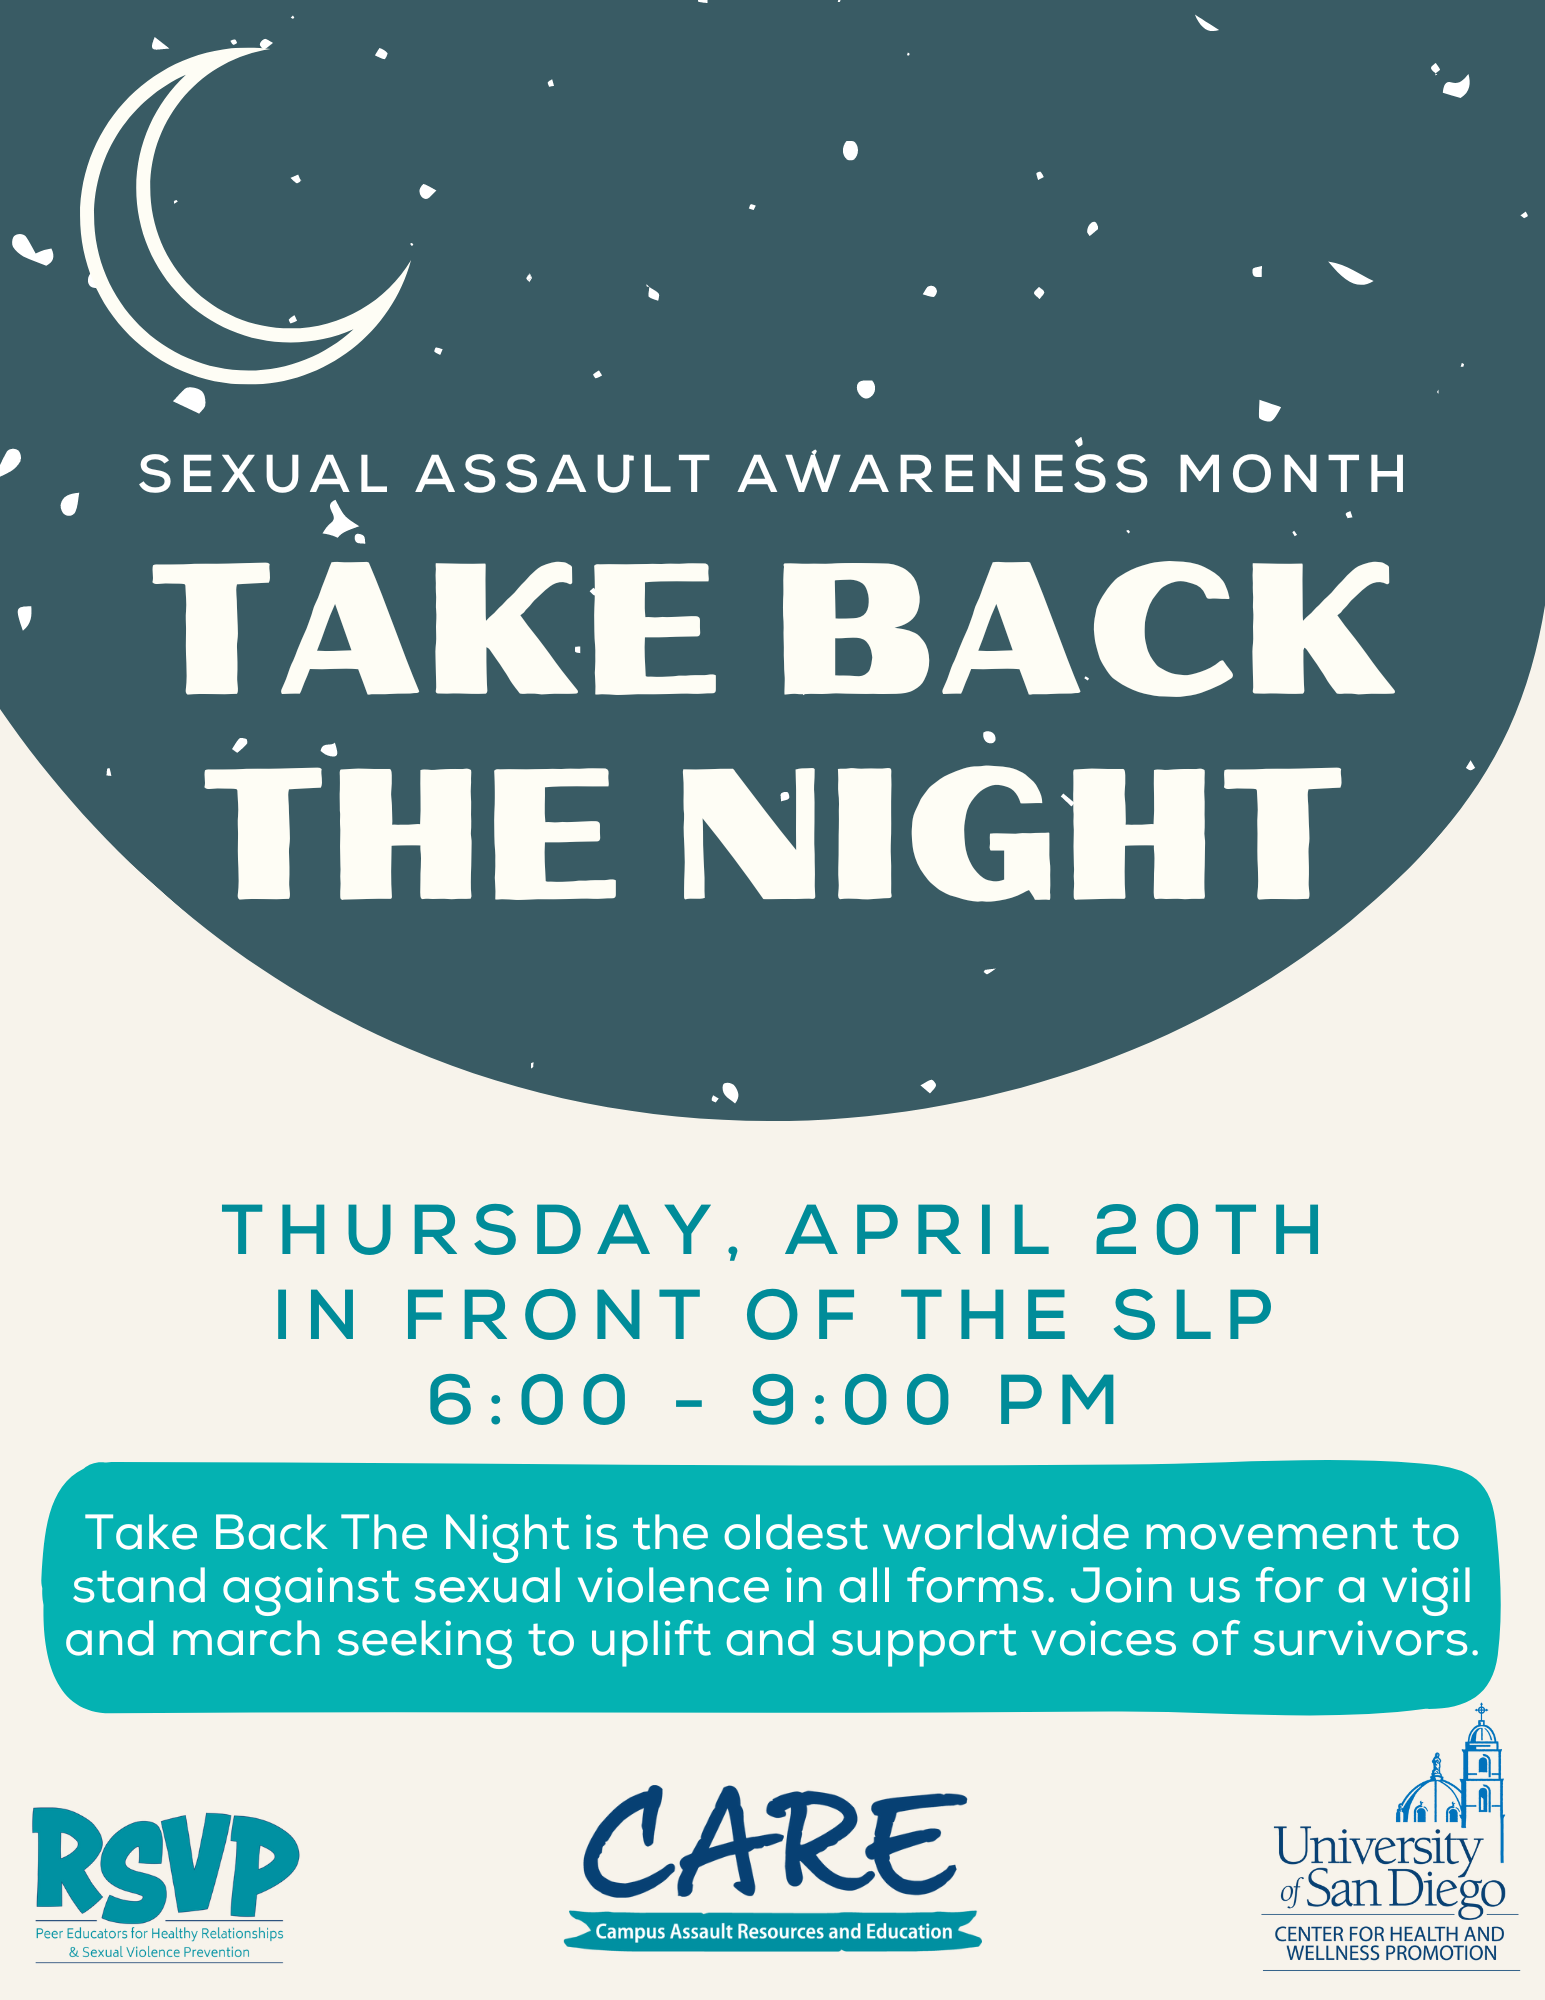 cream background with the following text: sexual assault awareness month, Take Back the Night, Thursday, april 20th In front of the SLP, 6:00 - 9:00 pM, Take Back The Night is the oldest worldwide movement to stand against sexual violence in all forms. Join us for a vigil and march seeking to uplift and support voices of survivors.